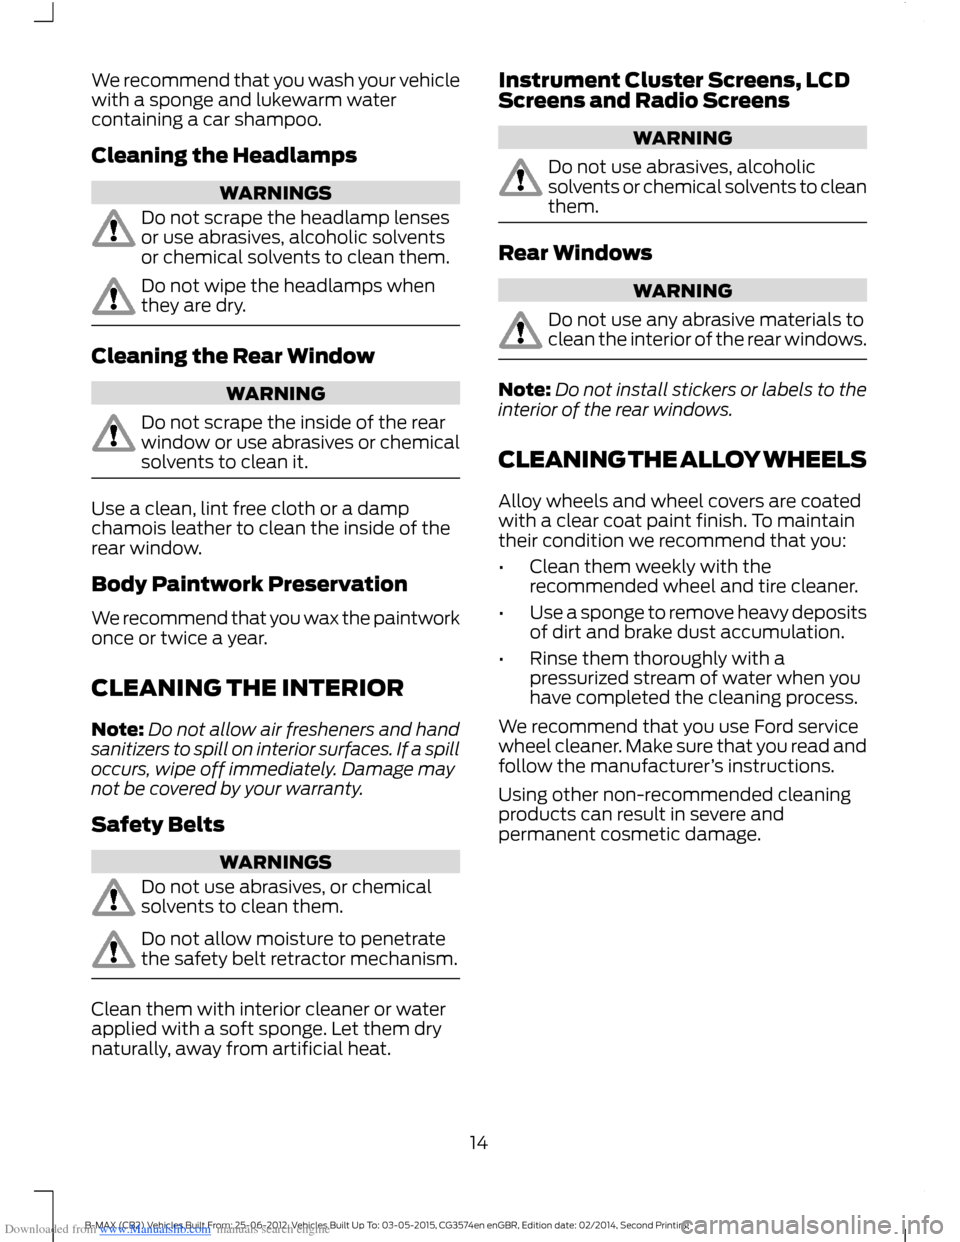 FORD B MAX 2014 1.G Quick Reference Guide Downloaded from www.Manualslib.com manuals search engine We recommend that you wash your vehiclewith a sponge and lukewarm watercontaining a car shampoo.
Cleaning the Headlamps
WARNINGS
Do not scrape 